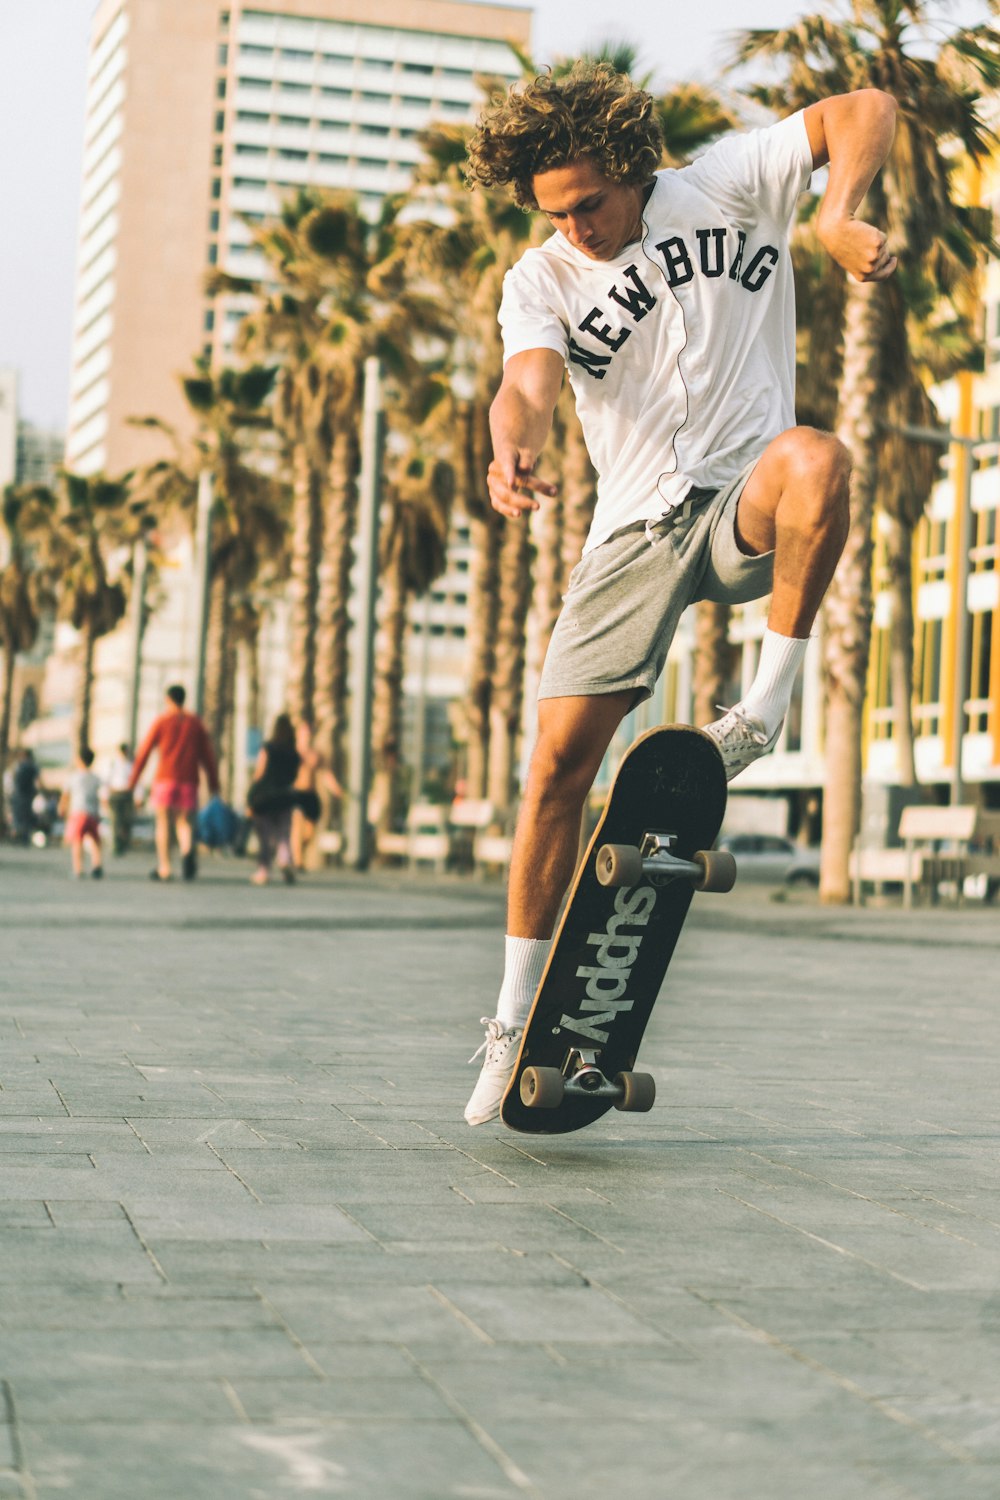 man wearing white and black t-shirt skating on road near buildings